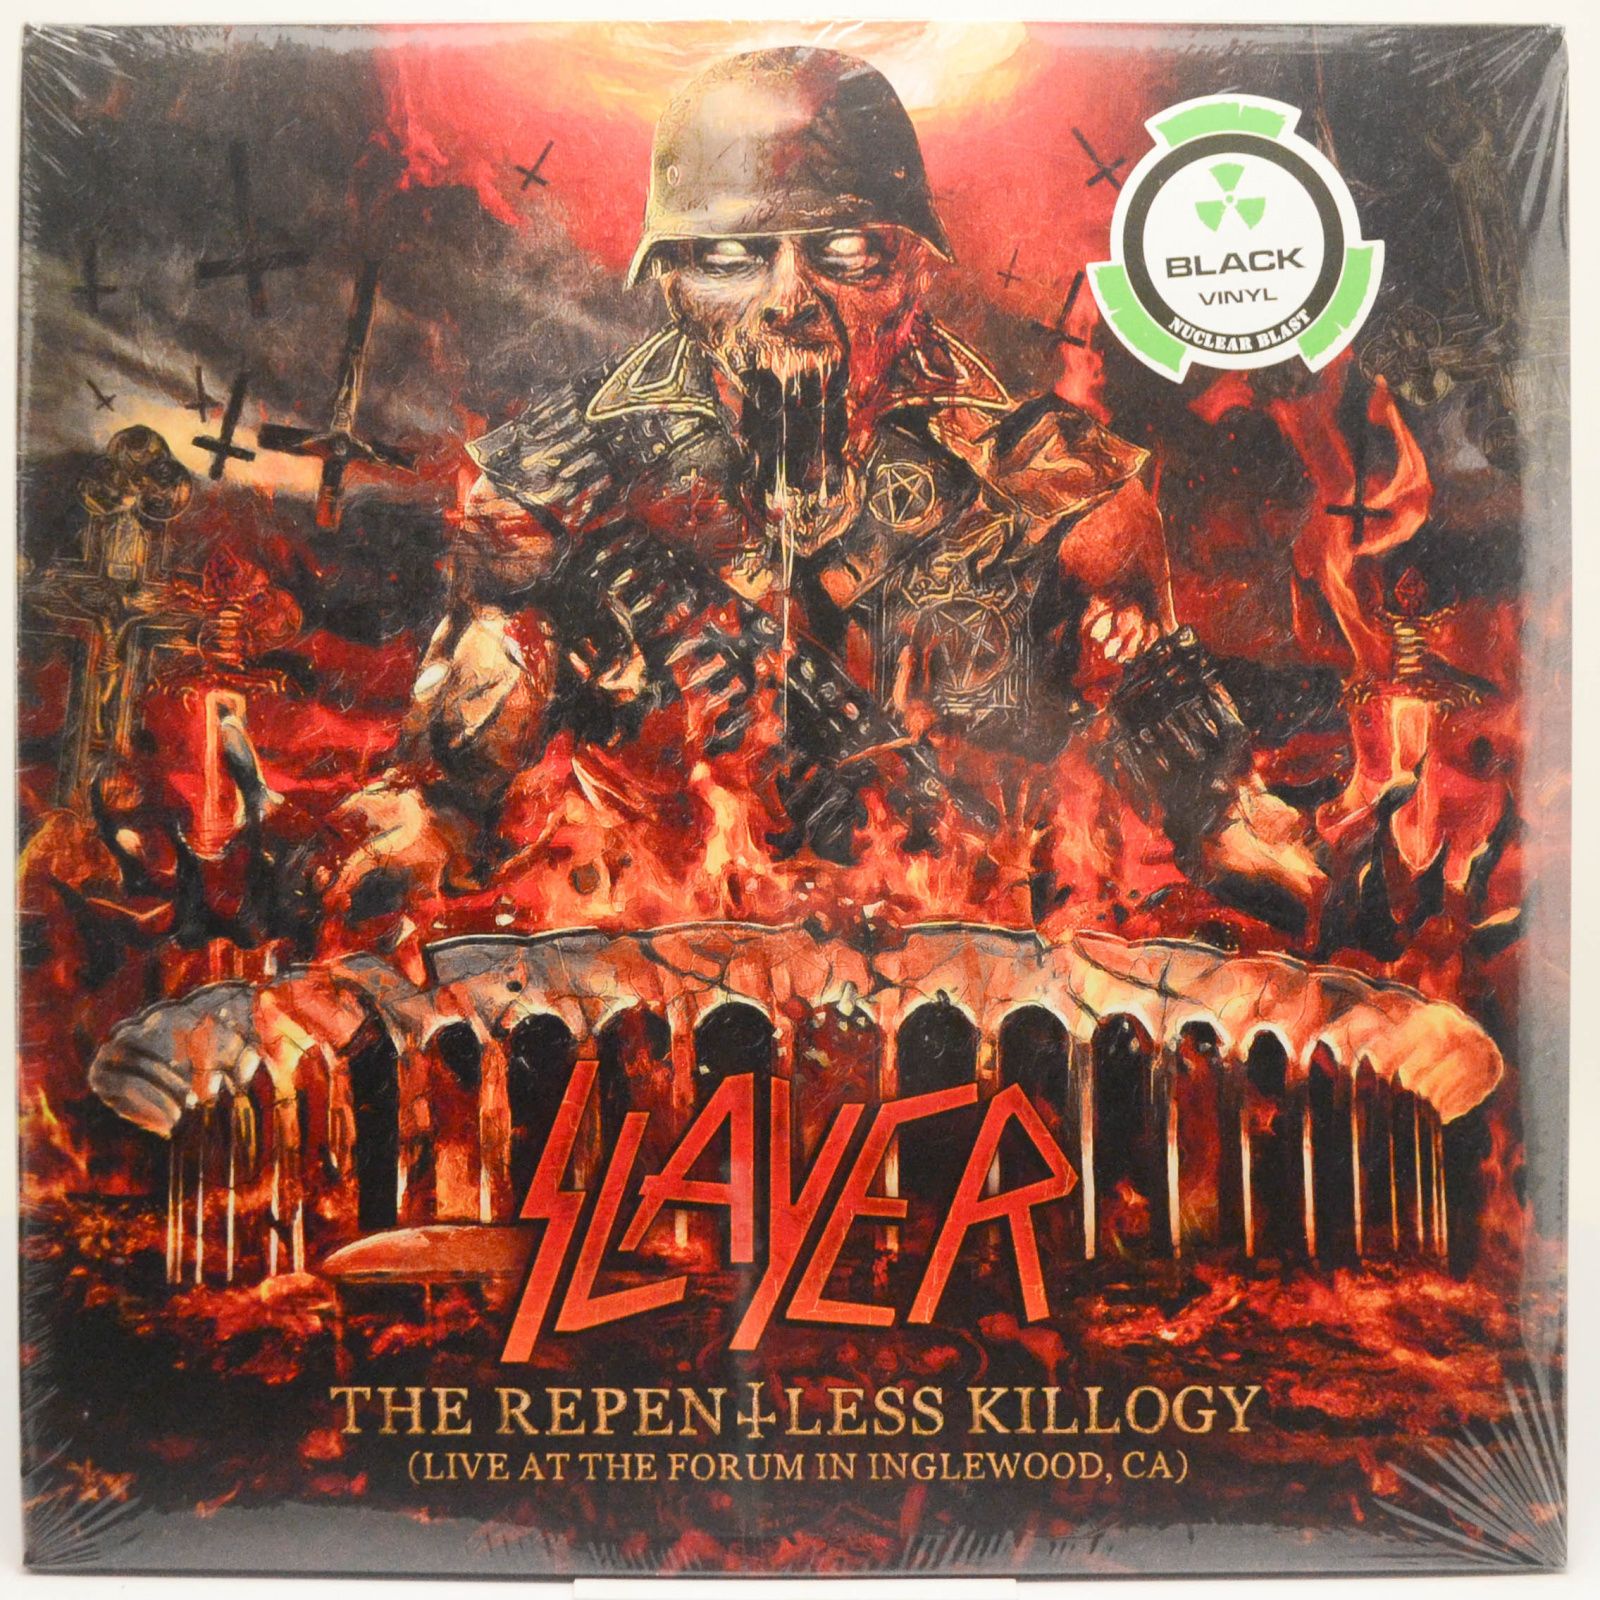 The Repentless Killogy (Live At The Forum In Inglewood, CA) (2LP), 2019